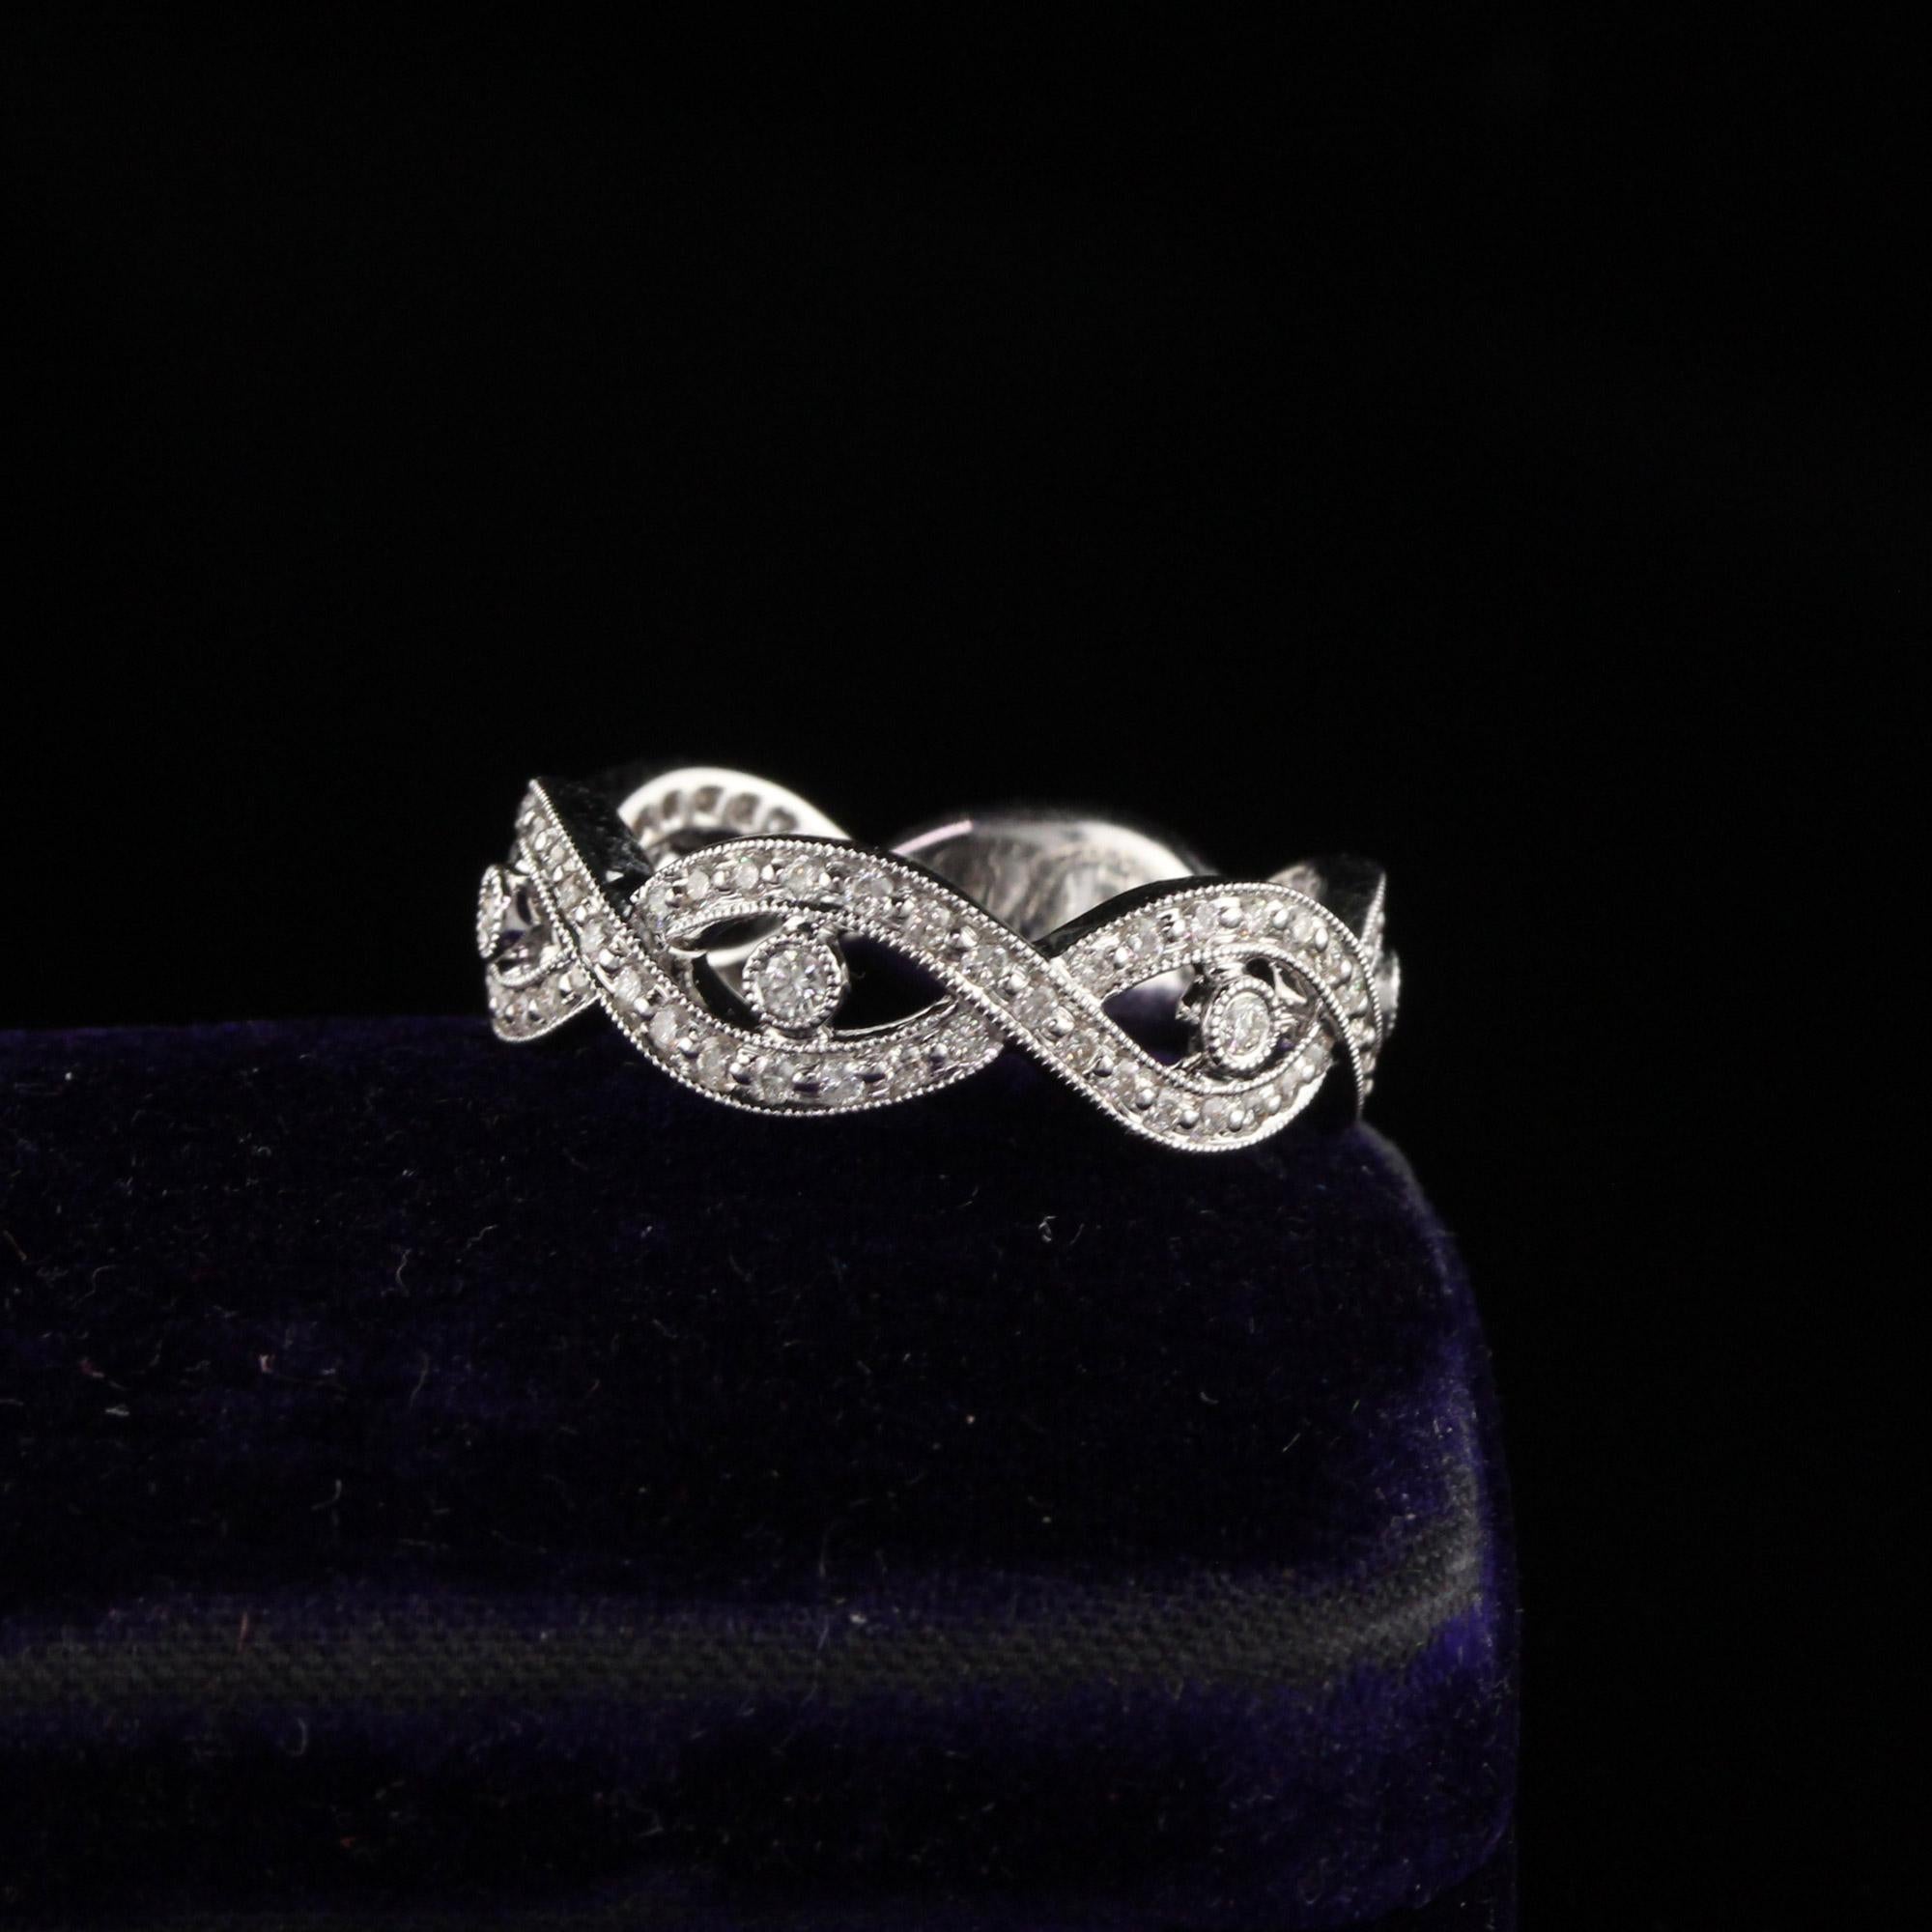 Gorgeous diamond band with twist design.

Metal: 18K White Gold

Weight: 5.9 Grams

Total Diamond Weight: Approximately 0.48 ct.

Diamond Color: G

Diamond Clarity: VS2

Ring Size: 6.75 (sizable)

Measurements: 6.62 x 3.28 mm